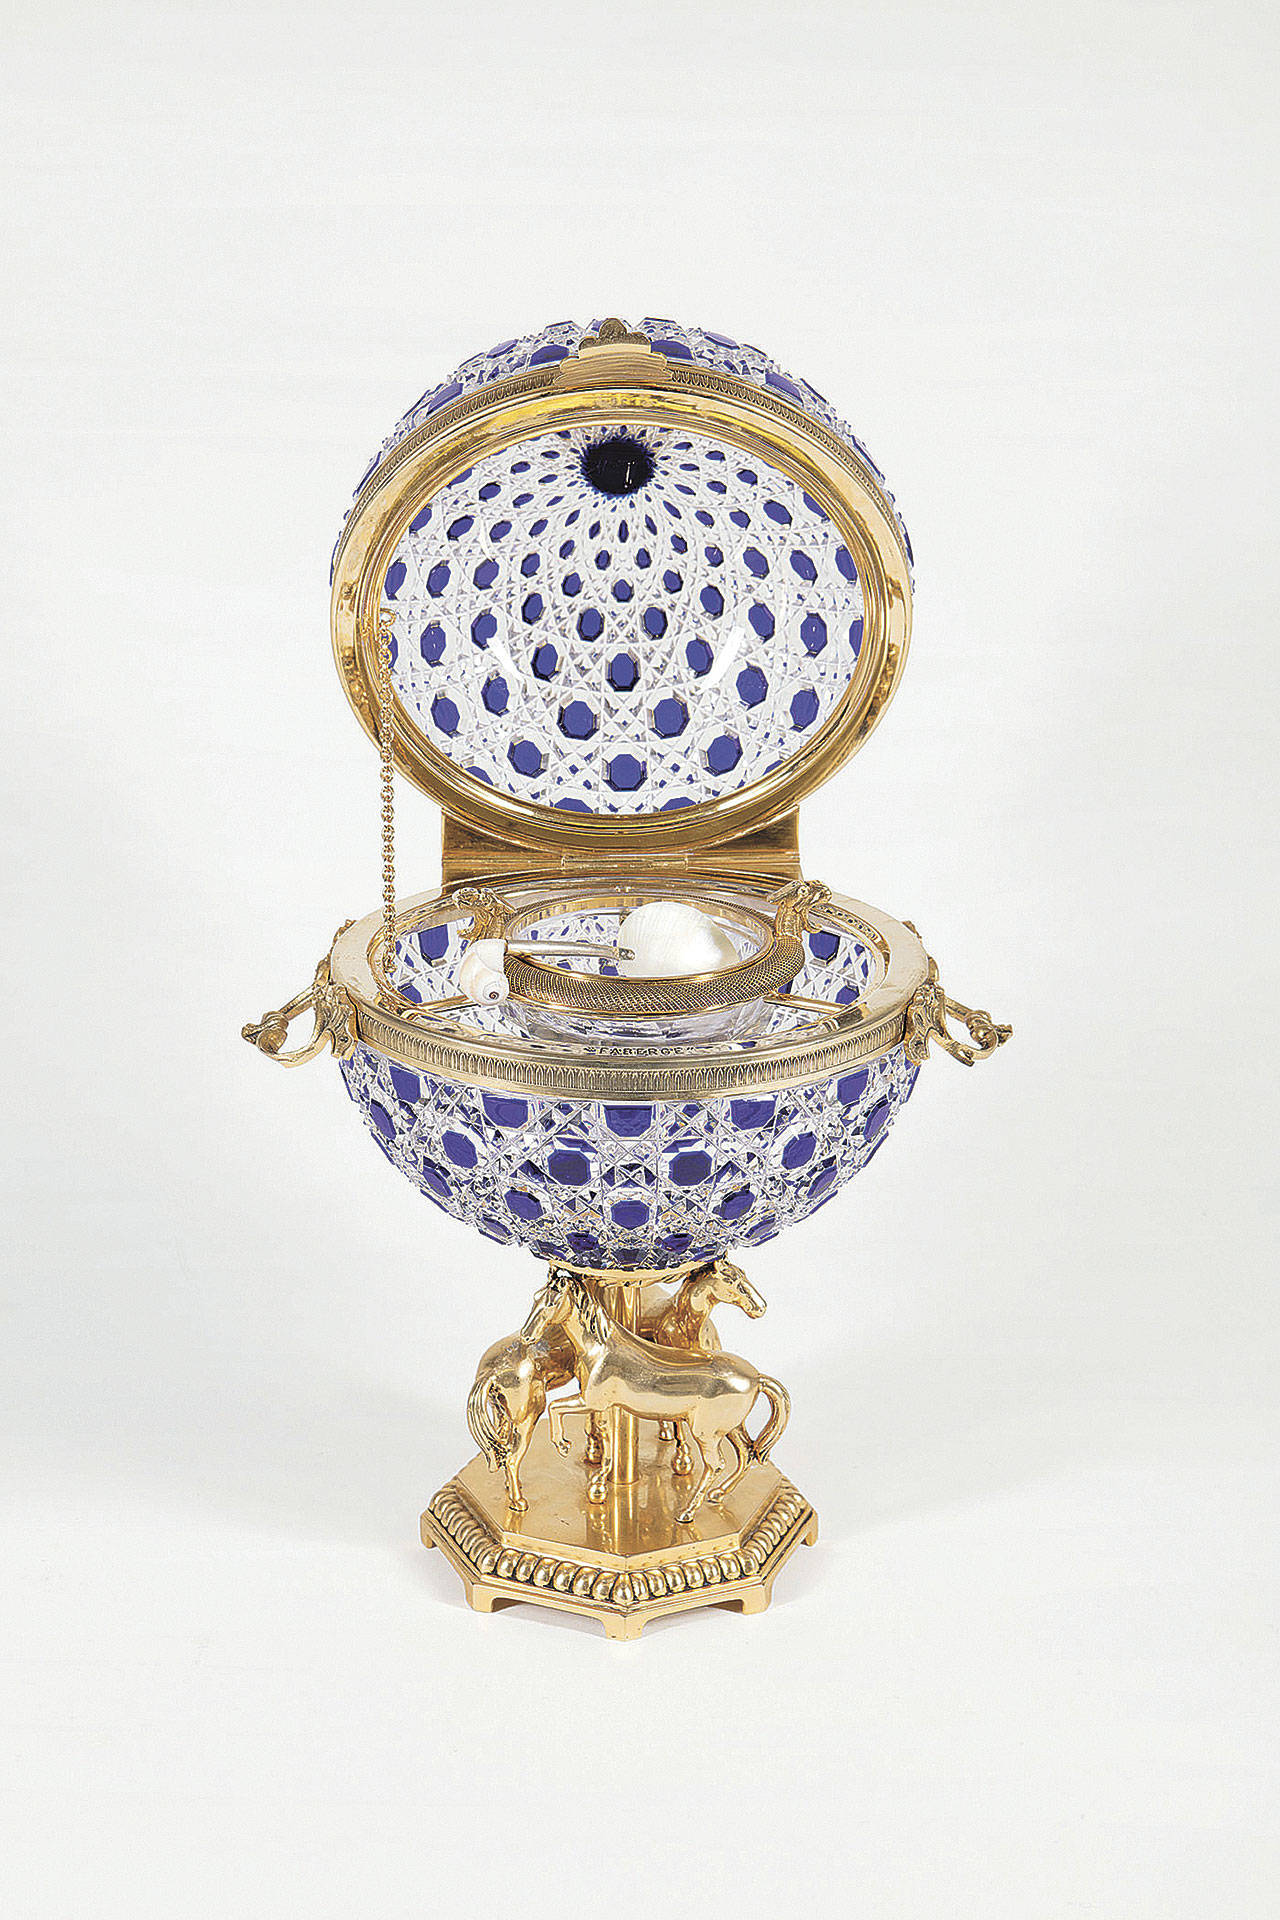 This cut-glass globe holds ice and caviar at fancy parties. It is part of the elaborate way caviar is properly served. It auctioned for over $2,000. (Cowles Syndicate Inc.)